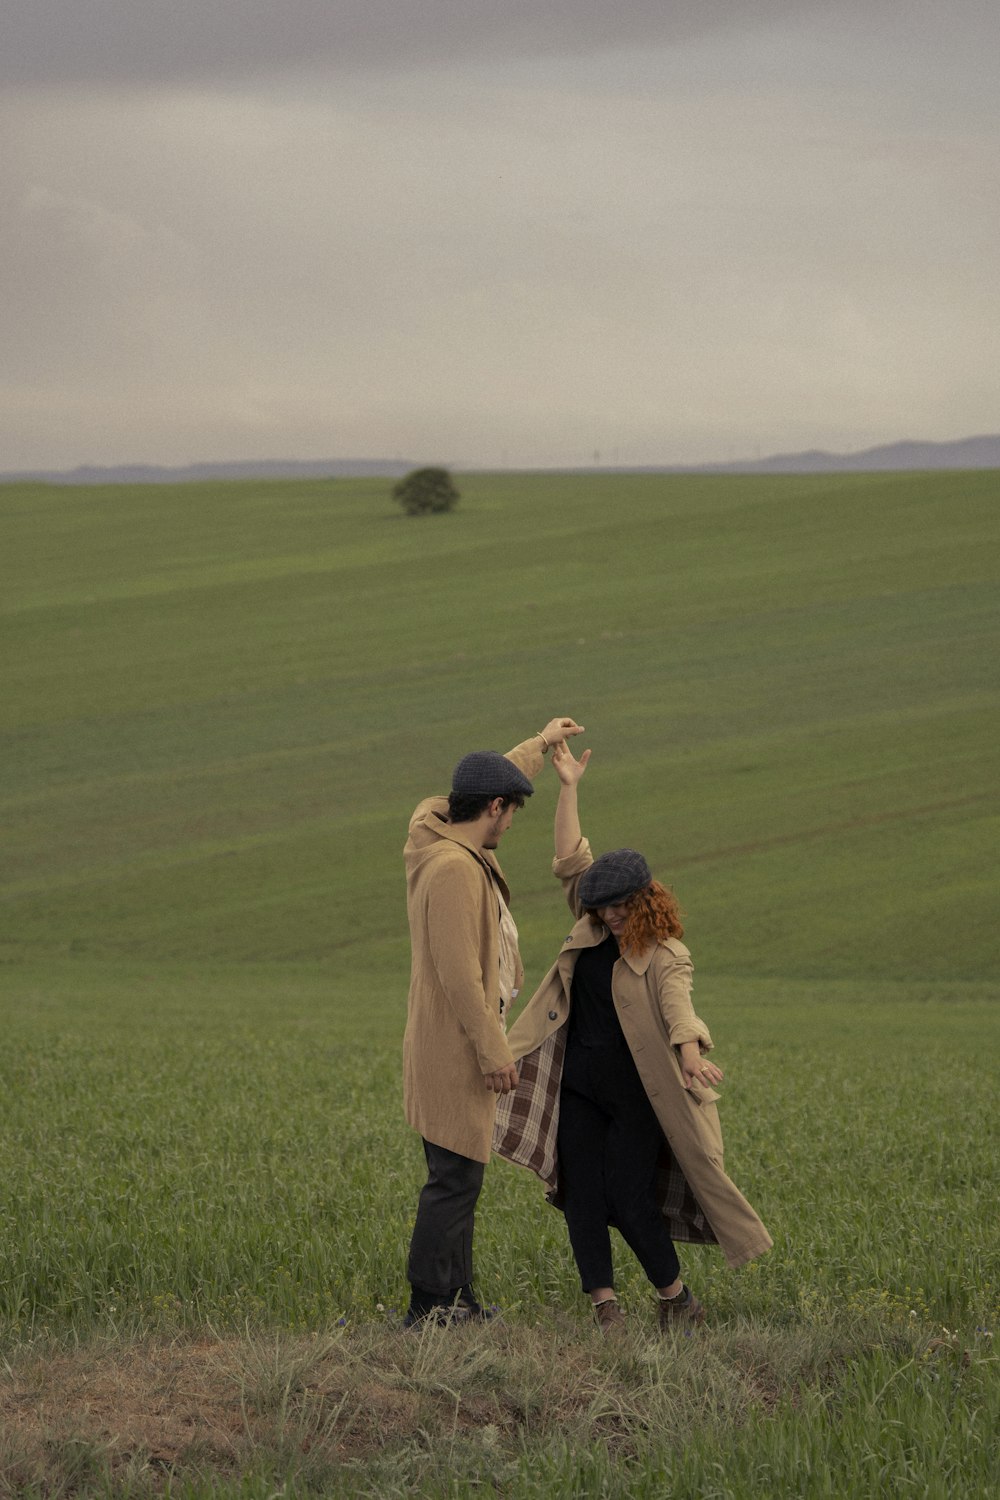 a man and woman standing in a field with a man holding a woman's hand up